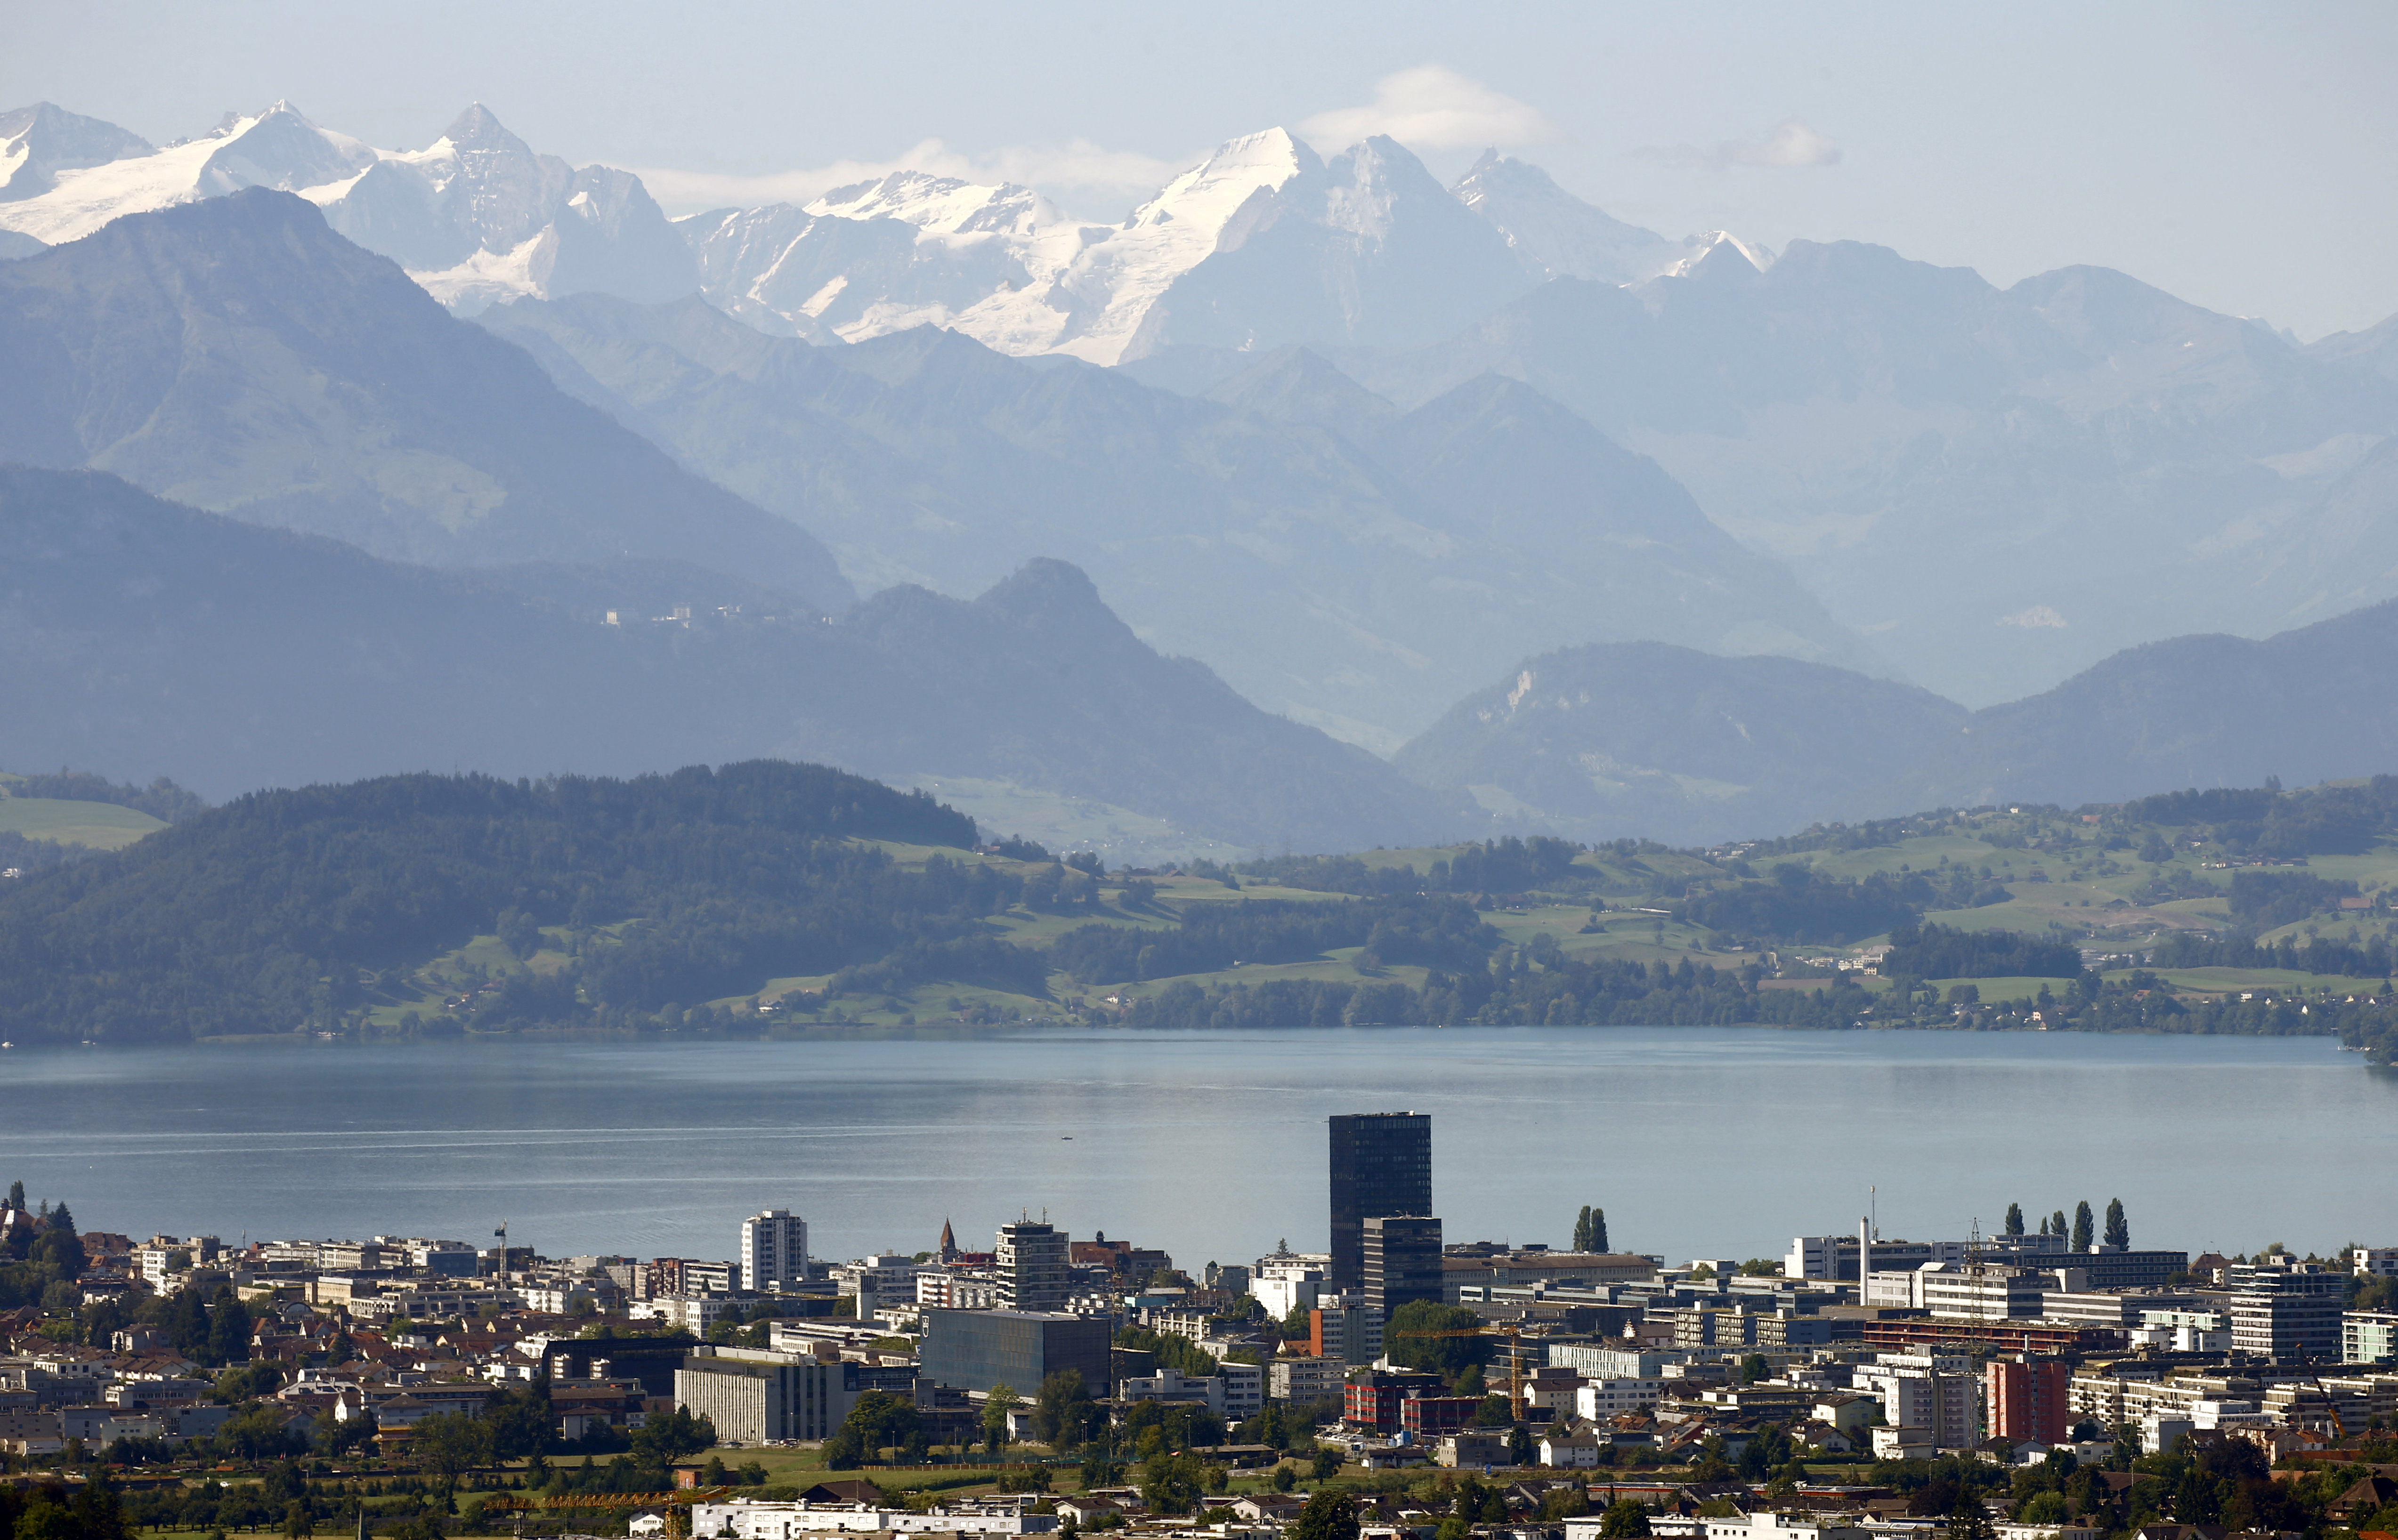 Peaks of Bernese Oberland are seen behind Lake Zug and the city of Zug